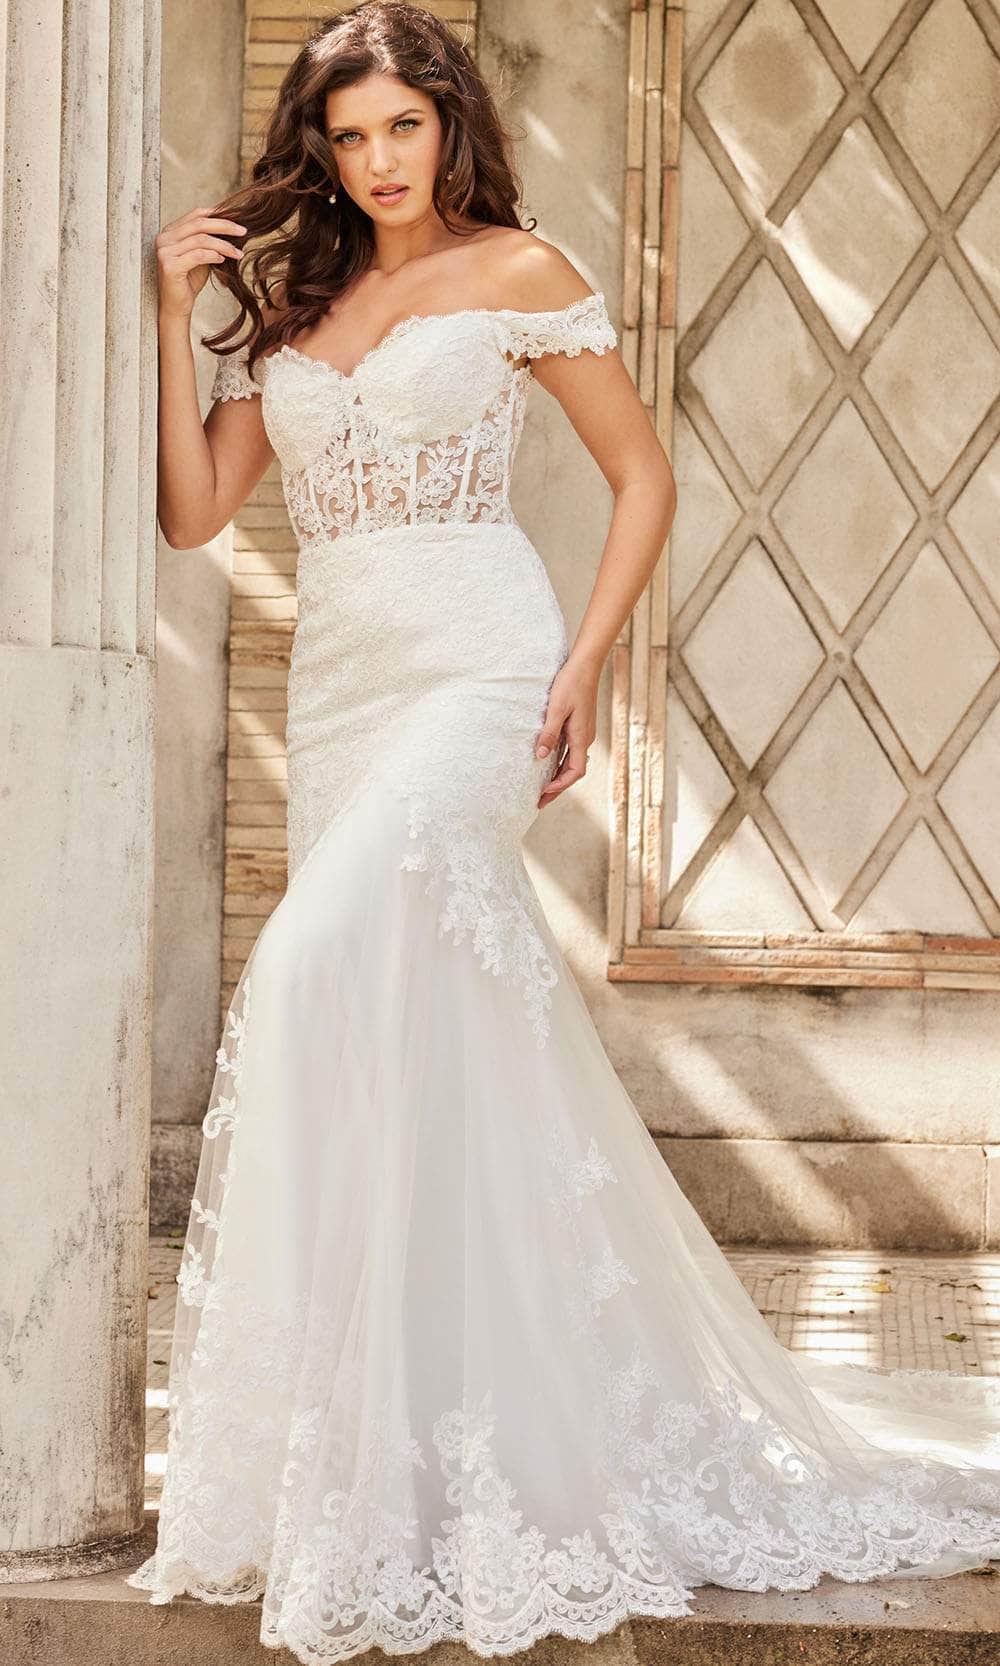 Image of Jovani Bridal JB220003 - Sweetheart Scalloped Lace Bridal Gown